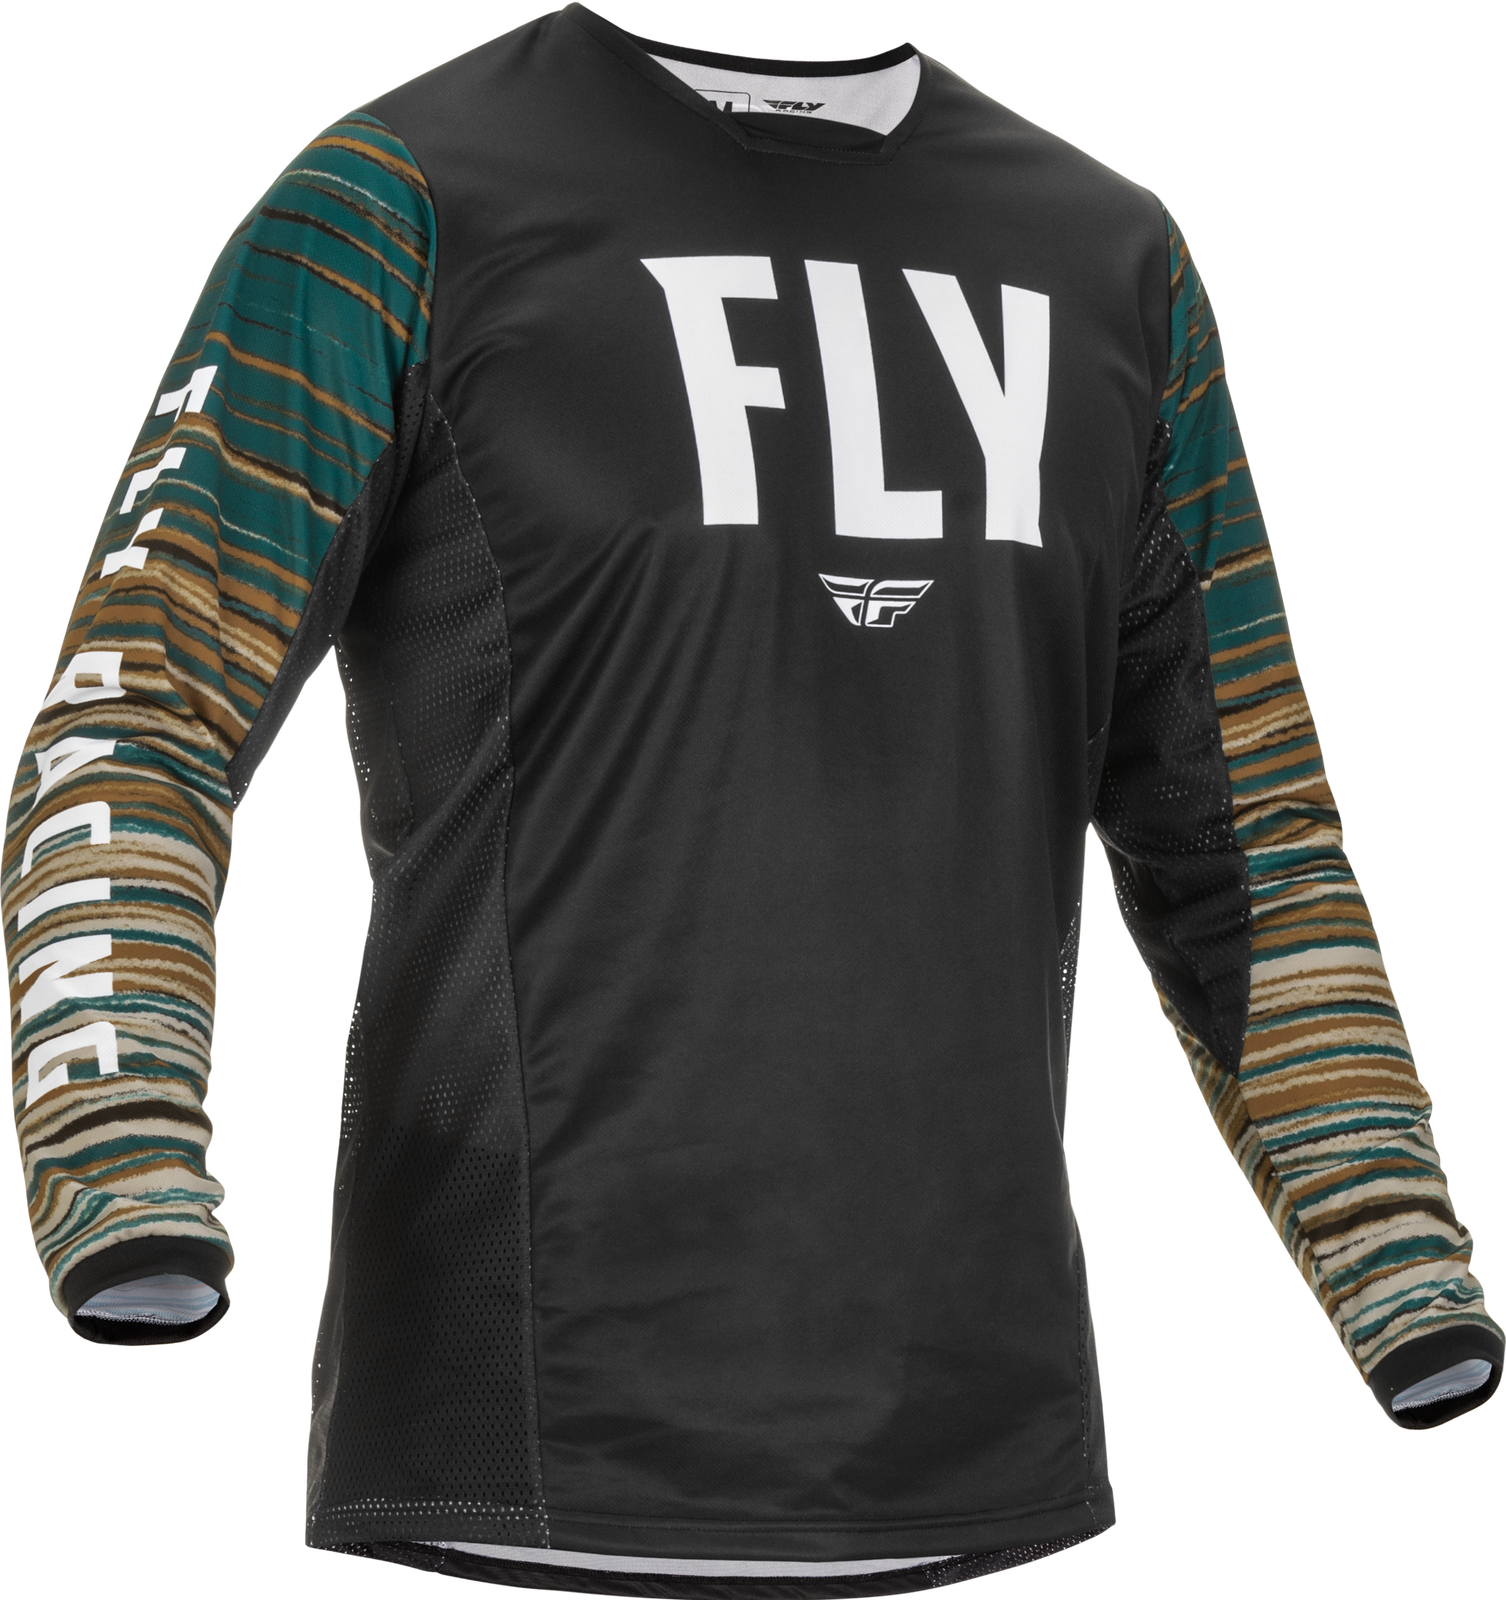 Fly Racing 375-520L Kinetic Wave Lg Very popular! Max 79% OFF Jersey Black Rum